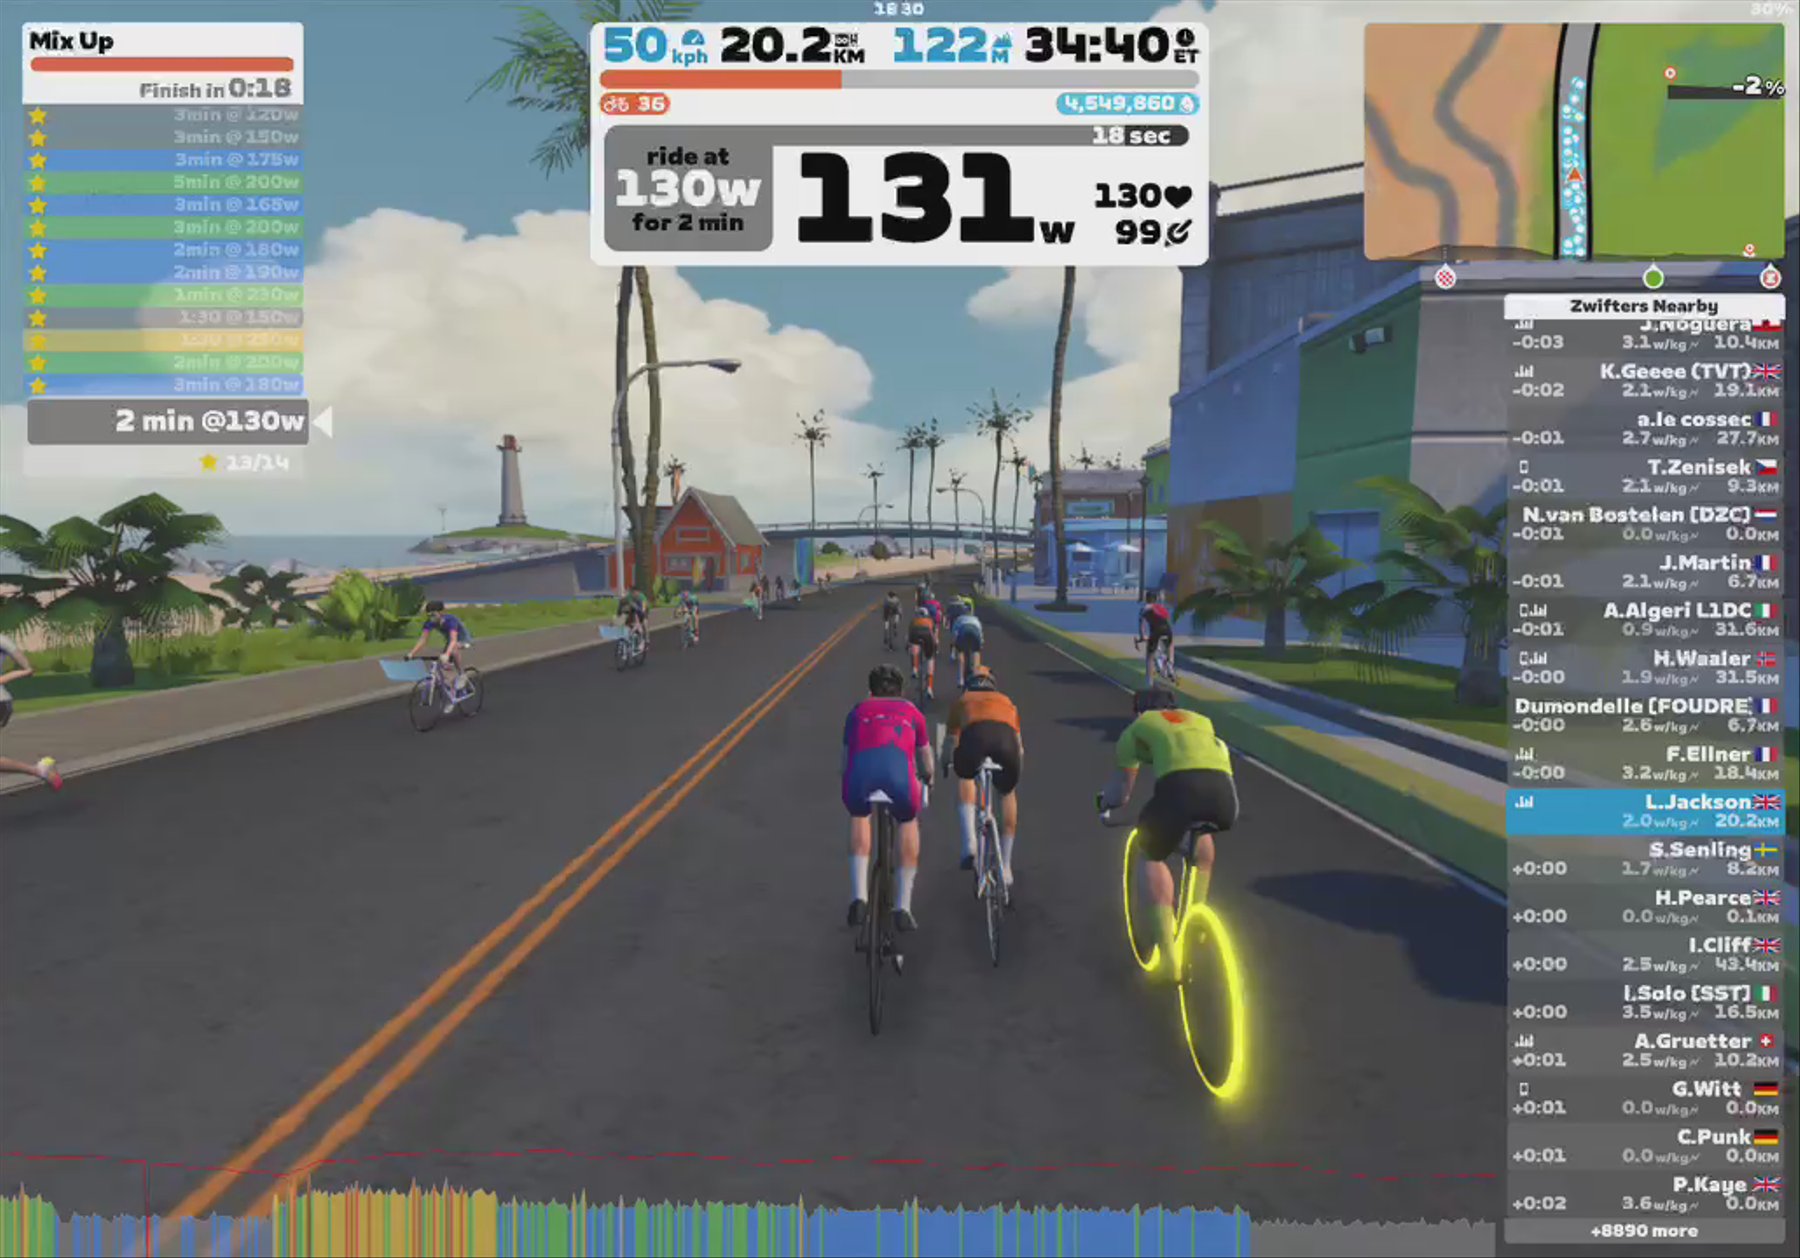 Zwift - Mix Up in Watopia